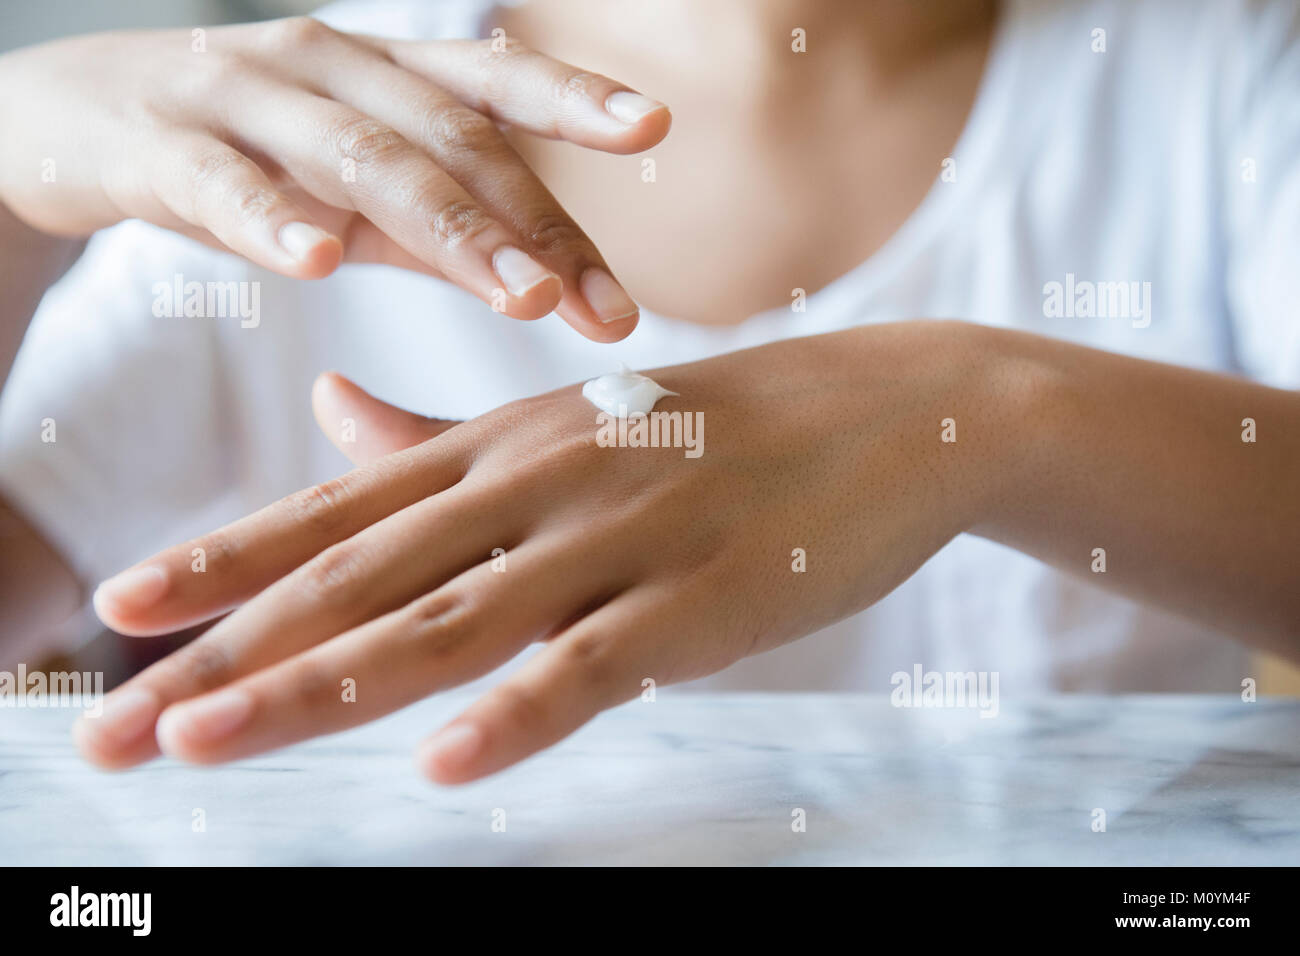 African American woman applying lotion to hand Stock Photo